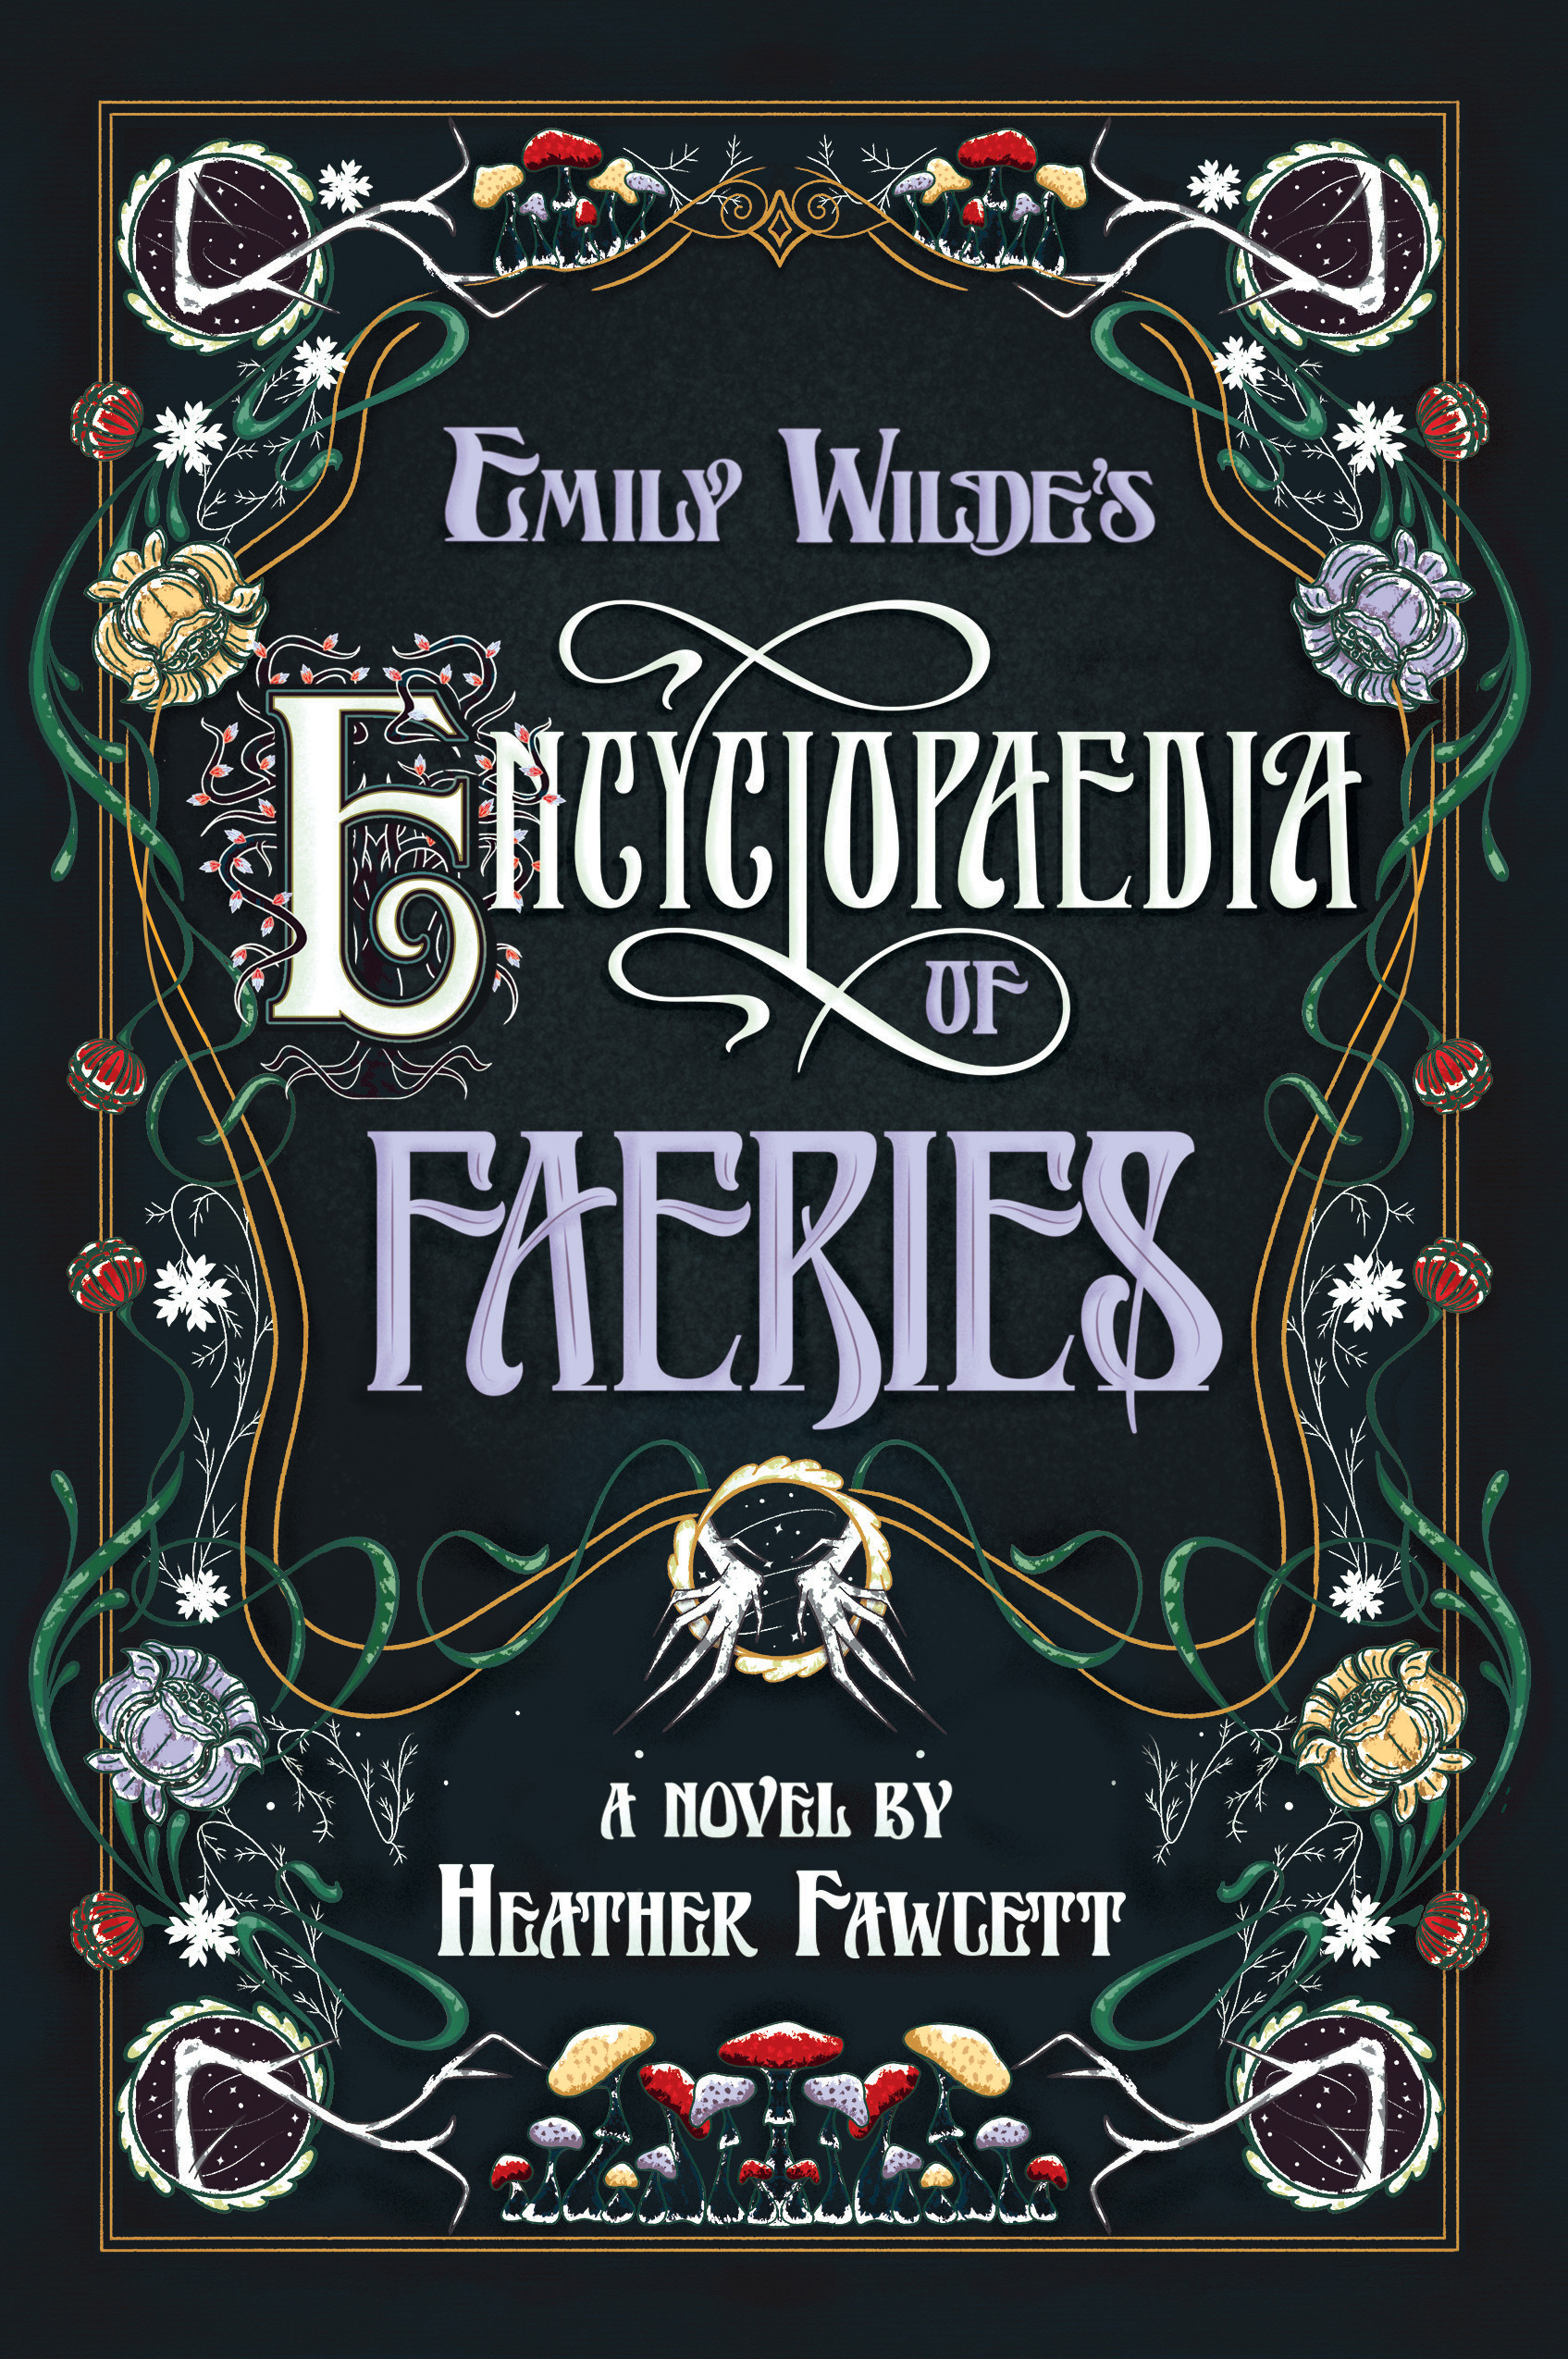 Emily Wilde's Encyclopaedia of Faeries : Book One of the Emily Wilde Series | Science-fiction & Fantasy